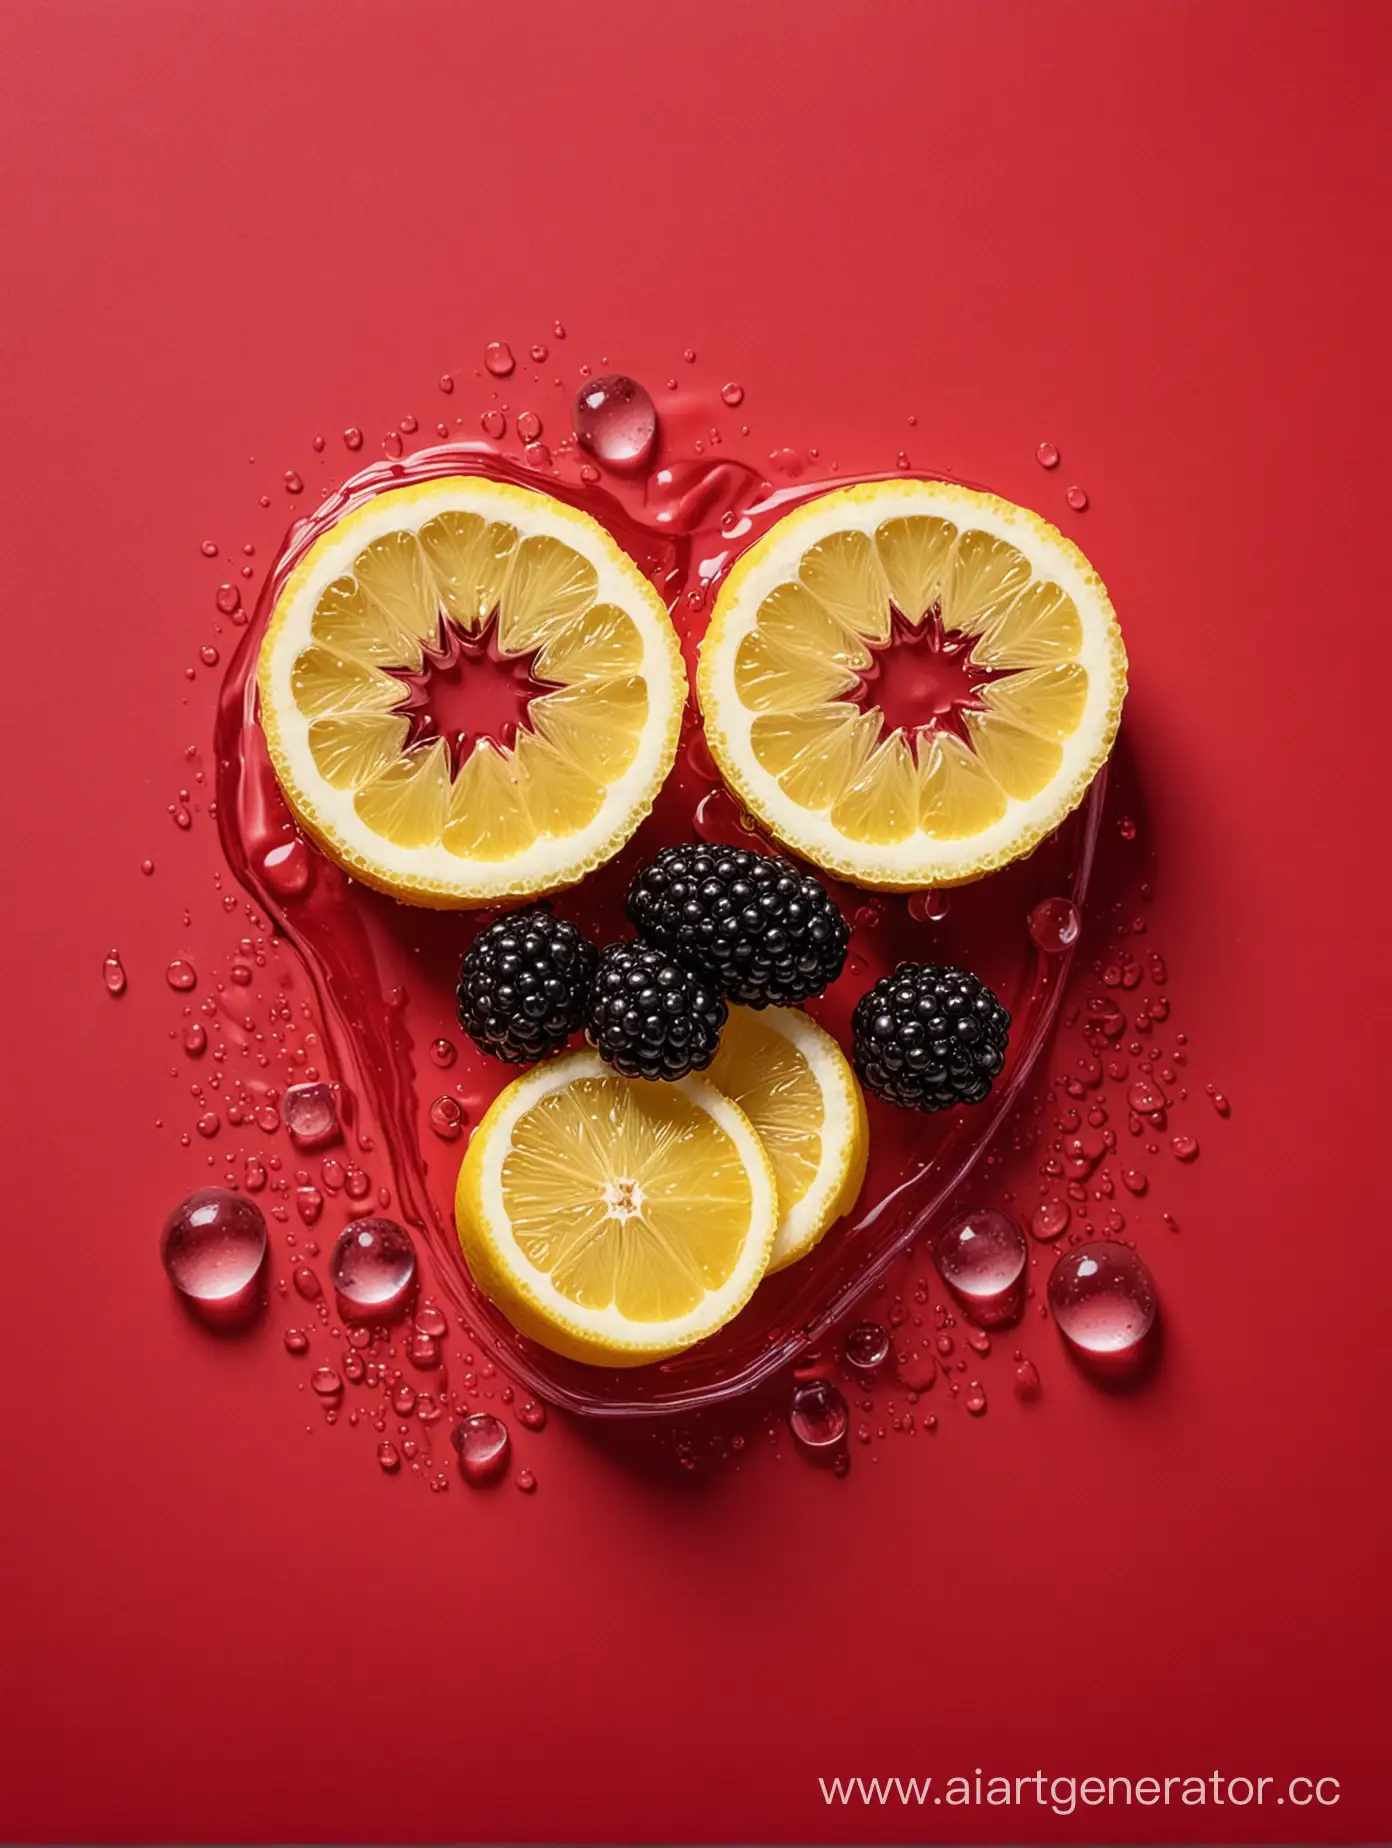 Boysenberry-and-Lemon-Slices-Water-Droplets-on-Vibrant-Red-Background